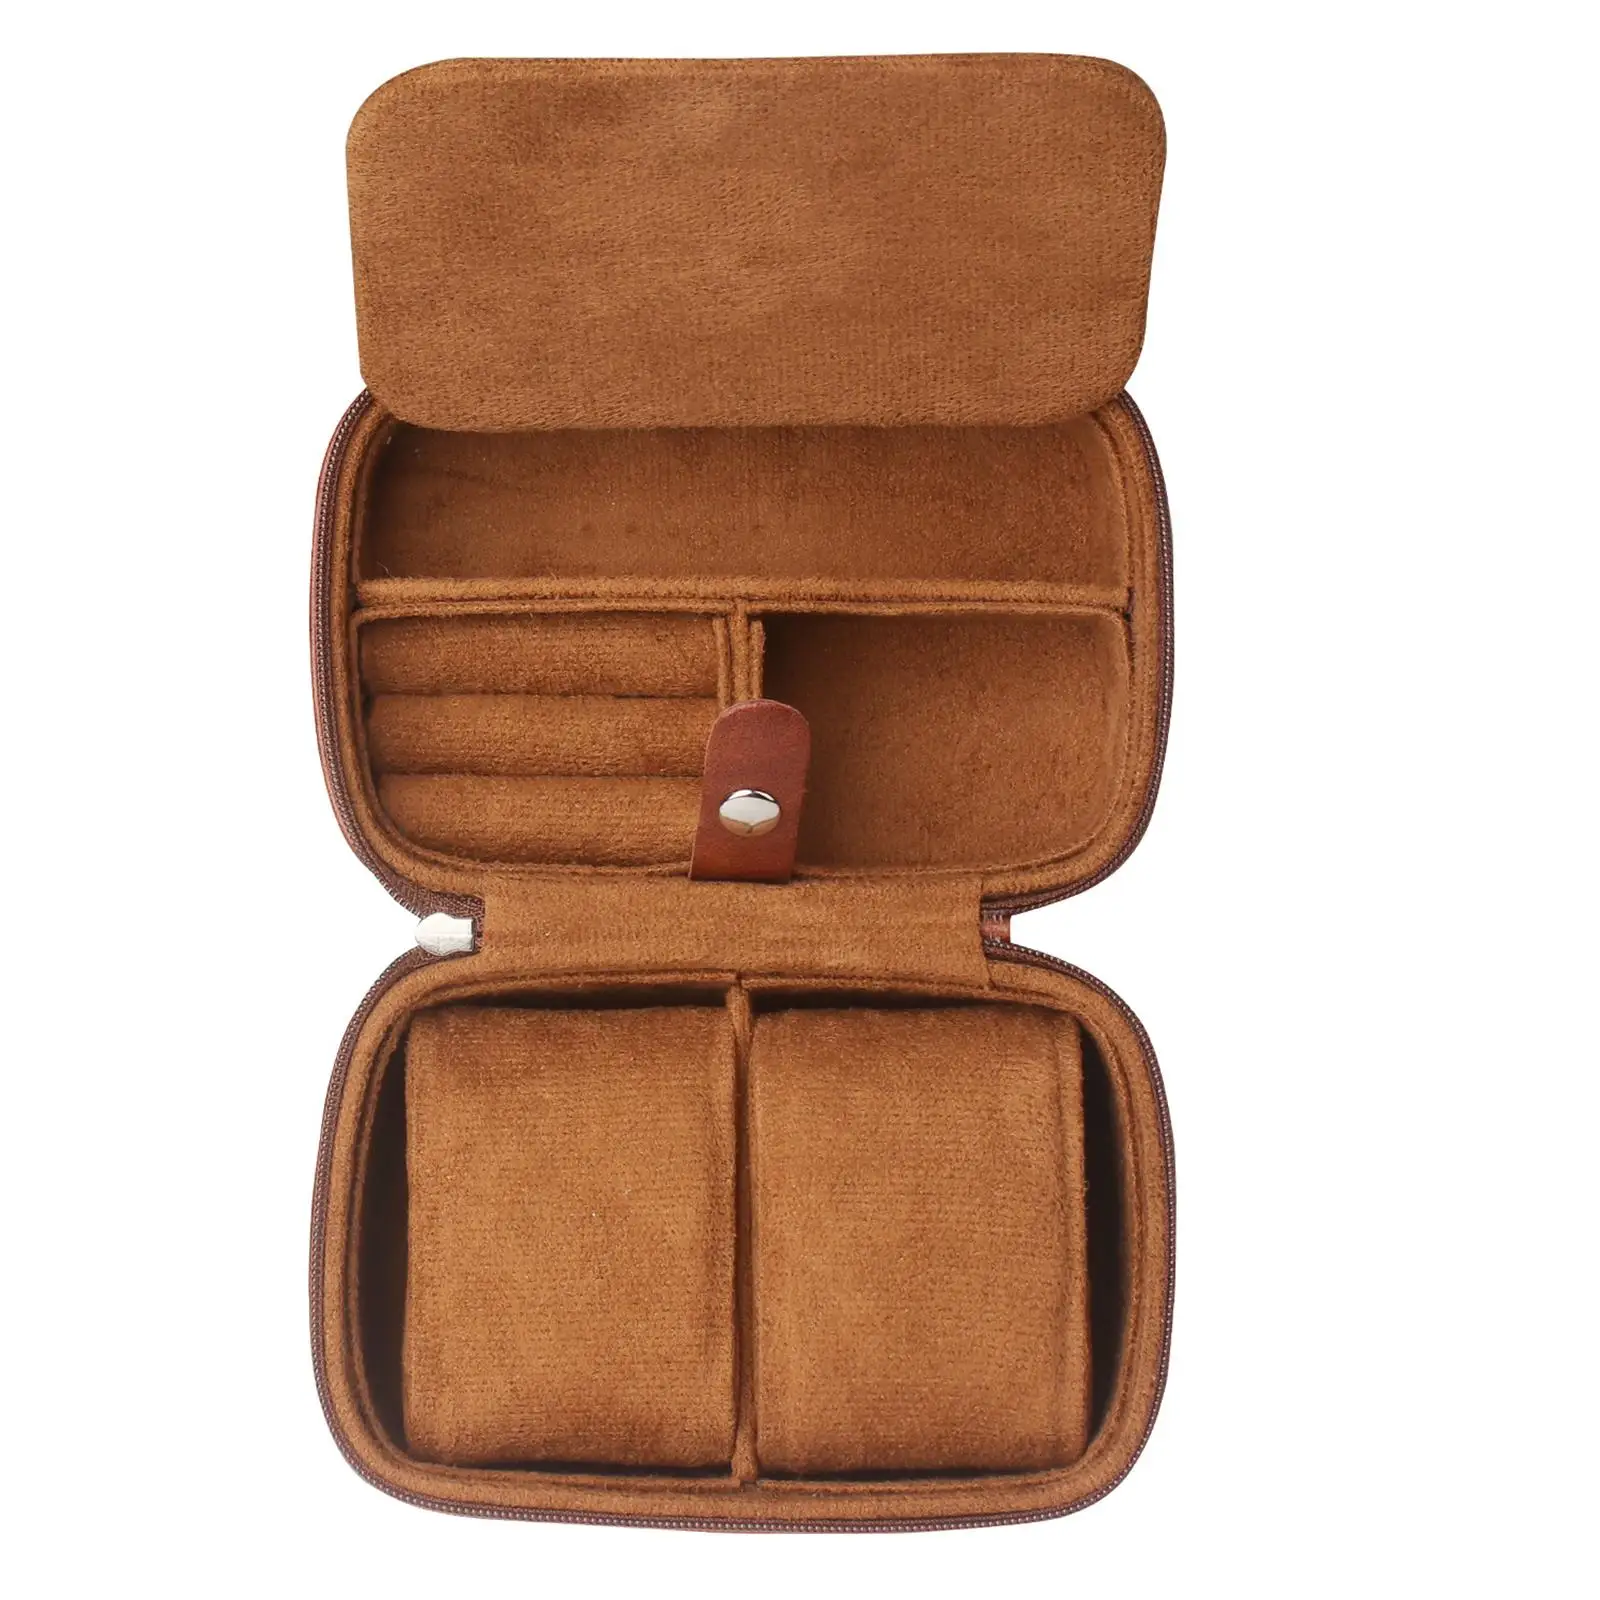 Watch Jewelry Box Zipper Closure Portable Watch Case Container Watch Gift Box Bracelet Holder PU Leather Watch Box for 2 Watches